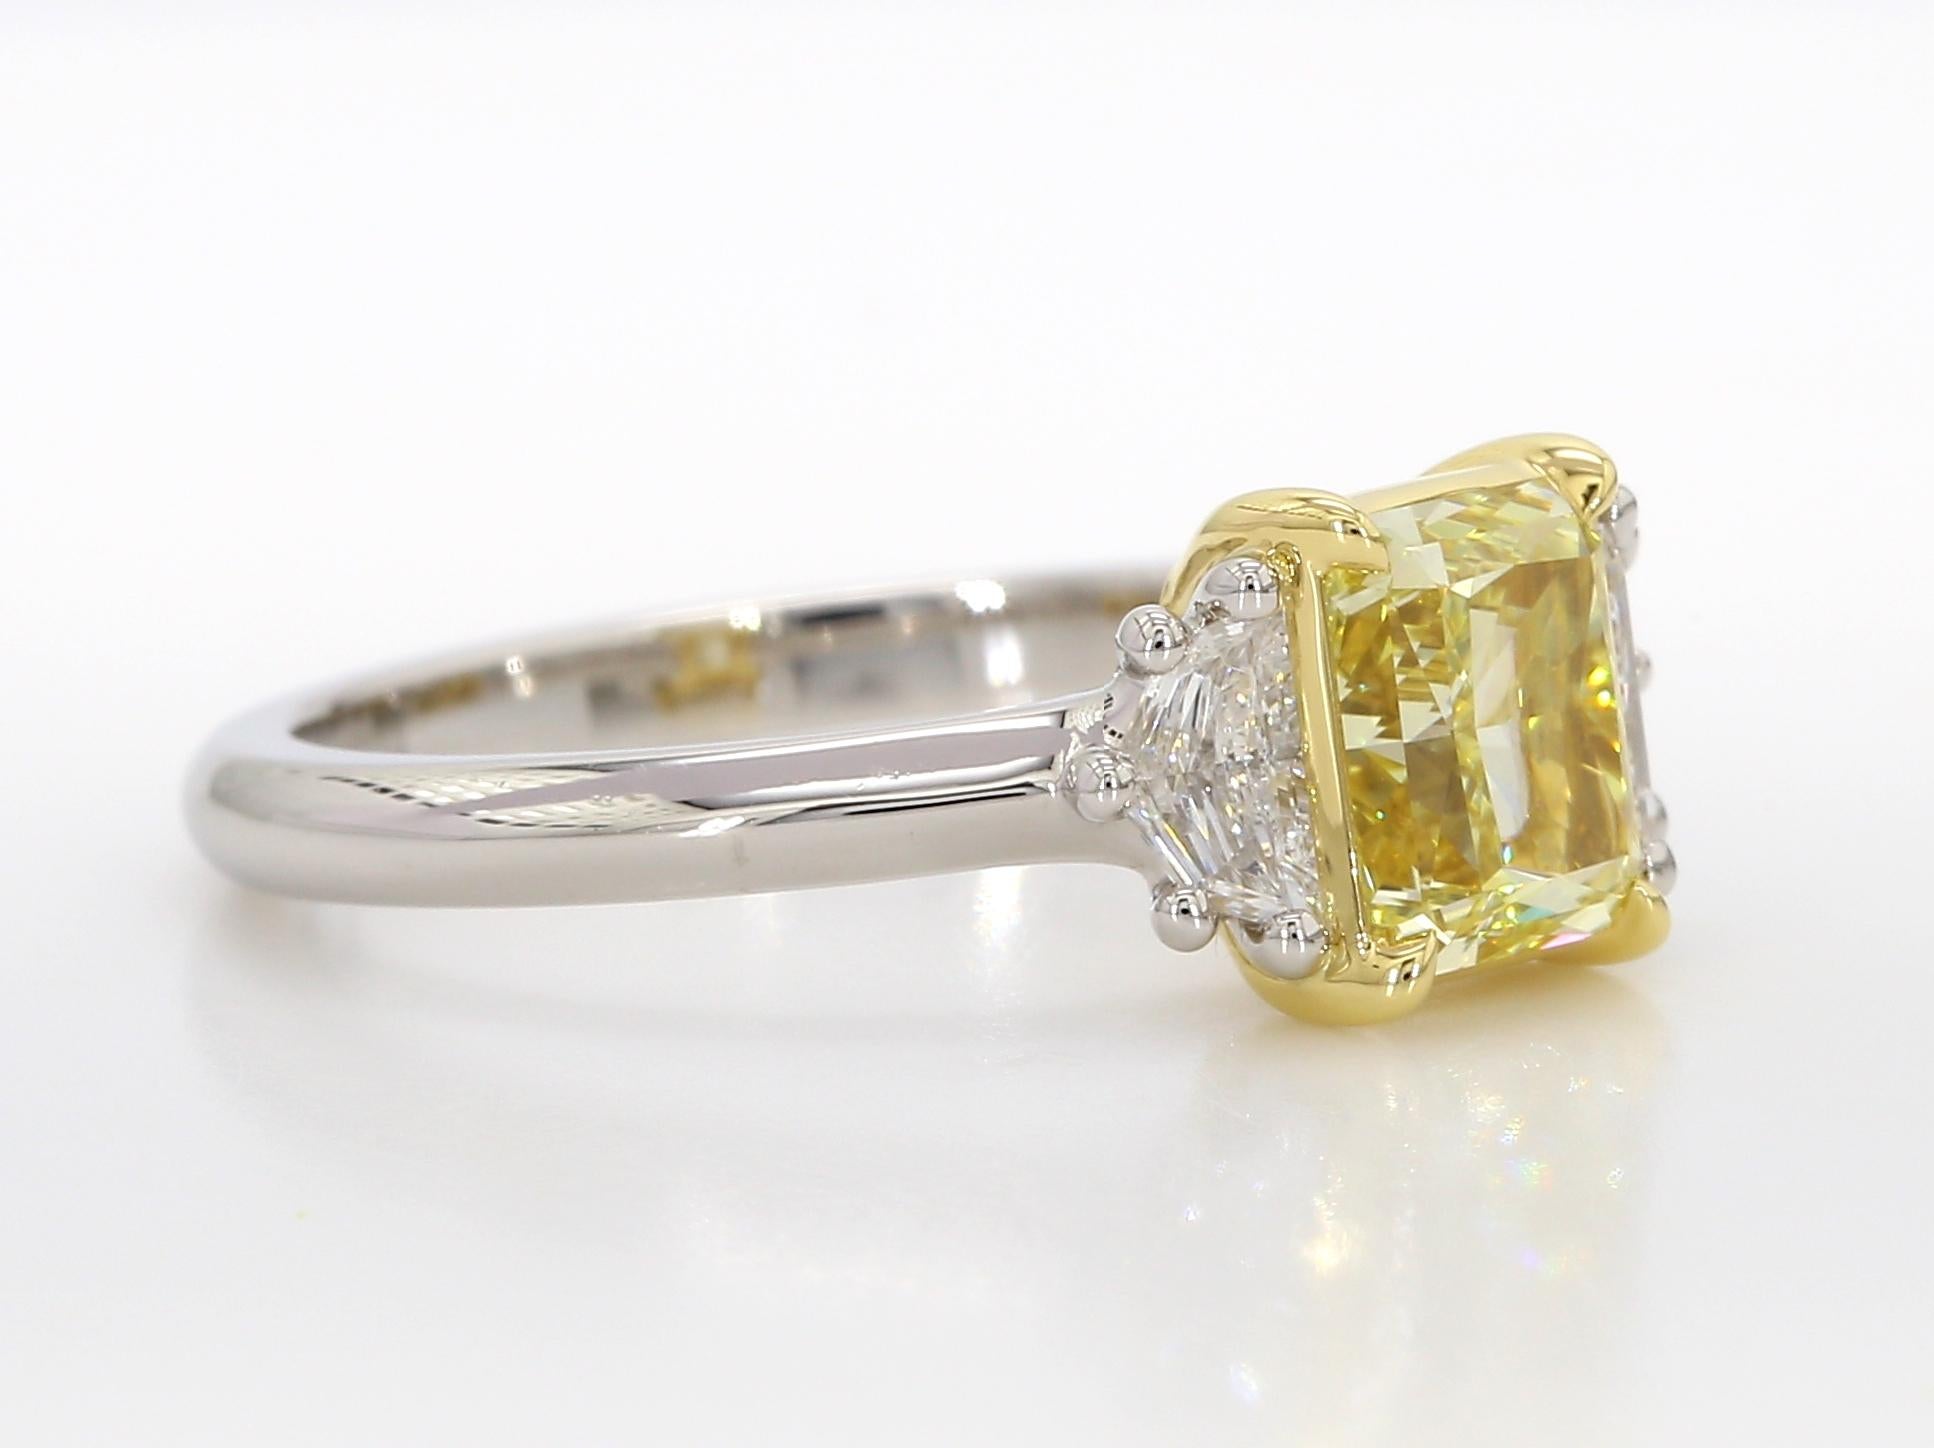 Contemporary 1.42 Carat Fancy Yellow Diamond Three-Stone Engagement Ring, GIA, IF, Platinum. For Sale